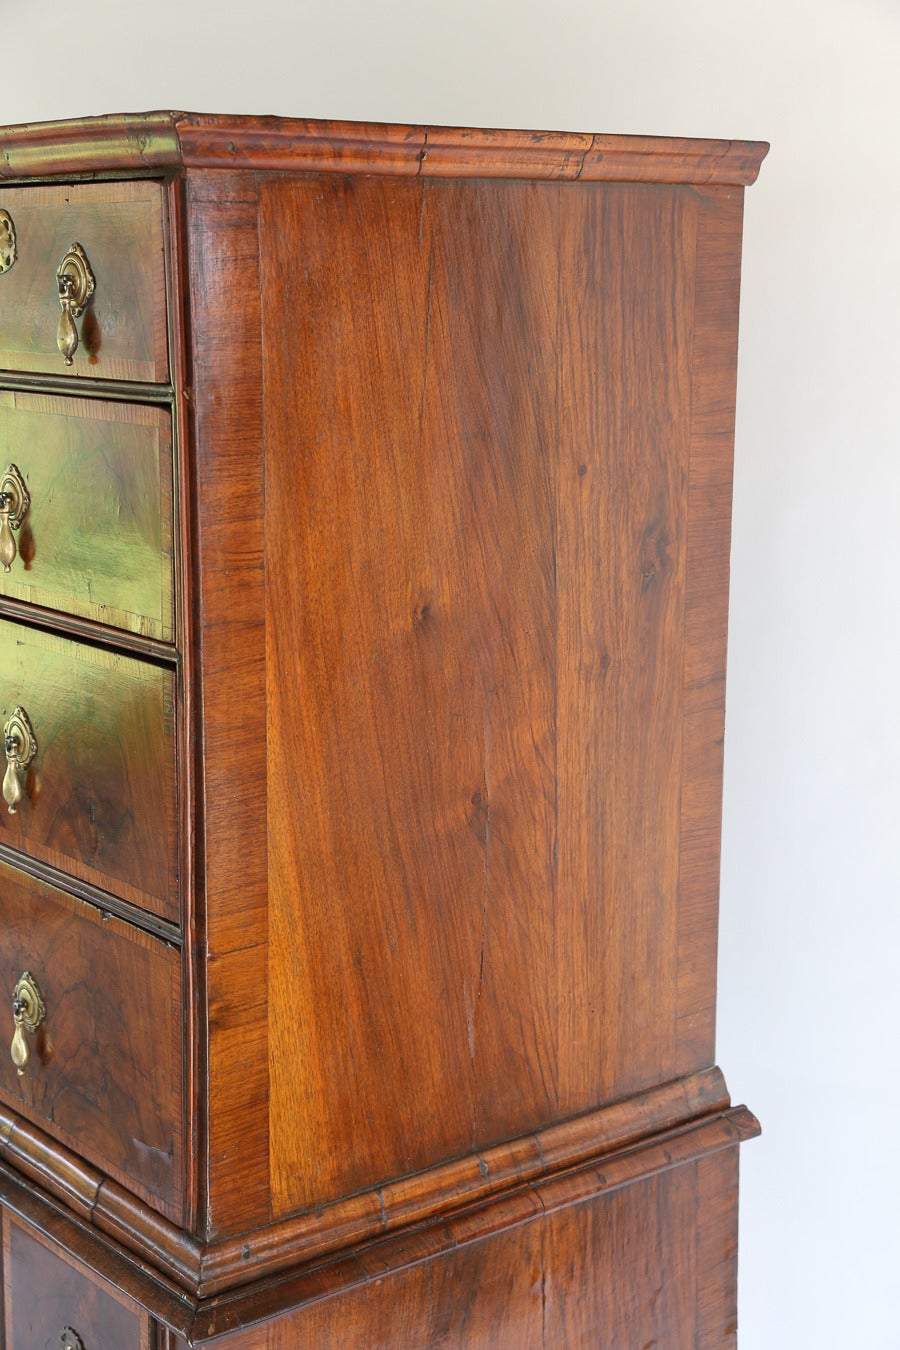 Antique English Queen Anne crotch flame walnut high chest, in two parts.

Upper section has a moulded Cornice over two short and three long drawers,
with crossbanded inlay with all matching panels.

Lower section with three drawers on a shaped